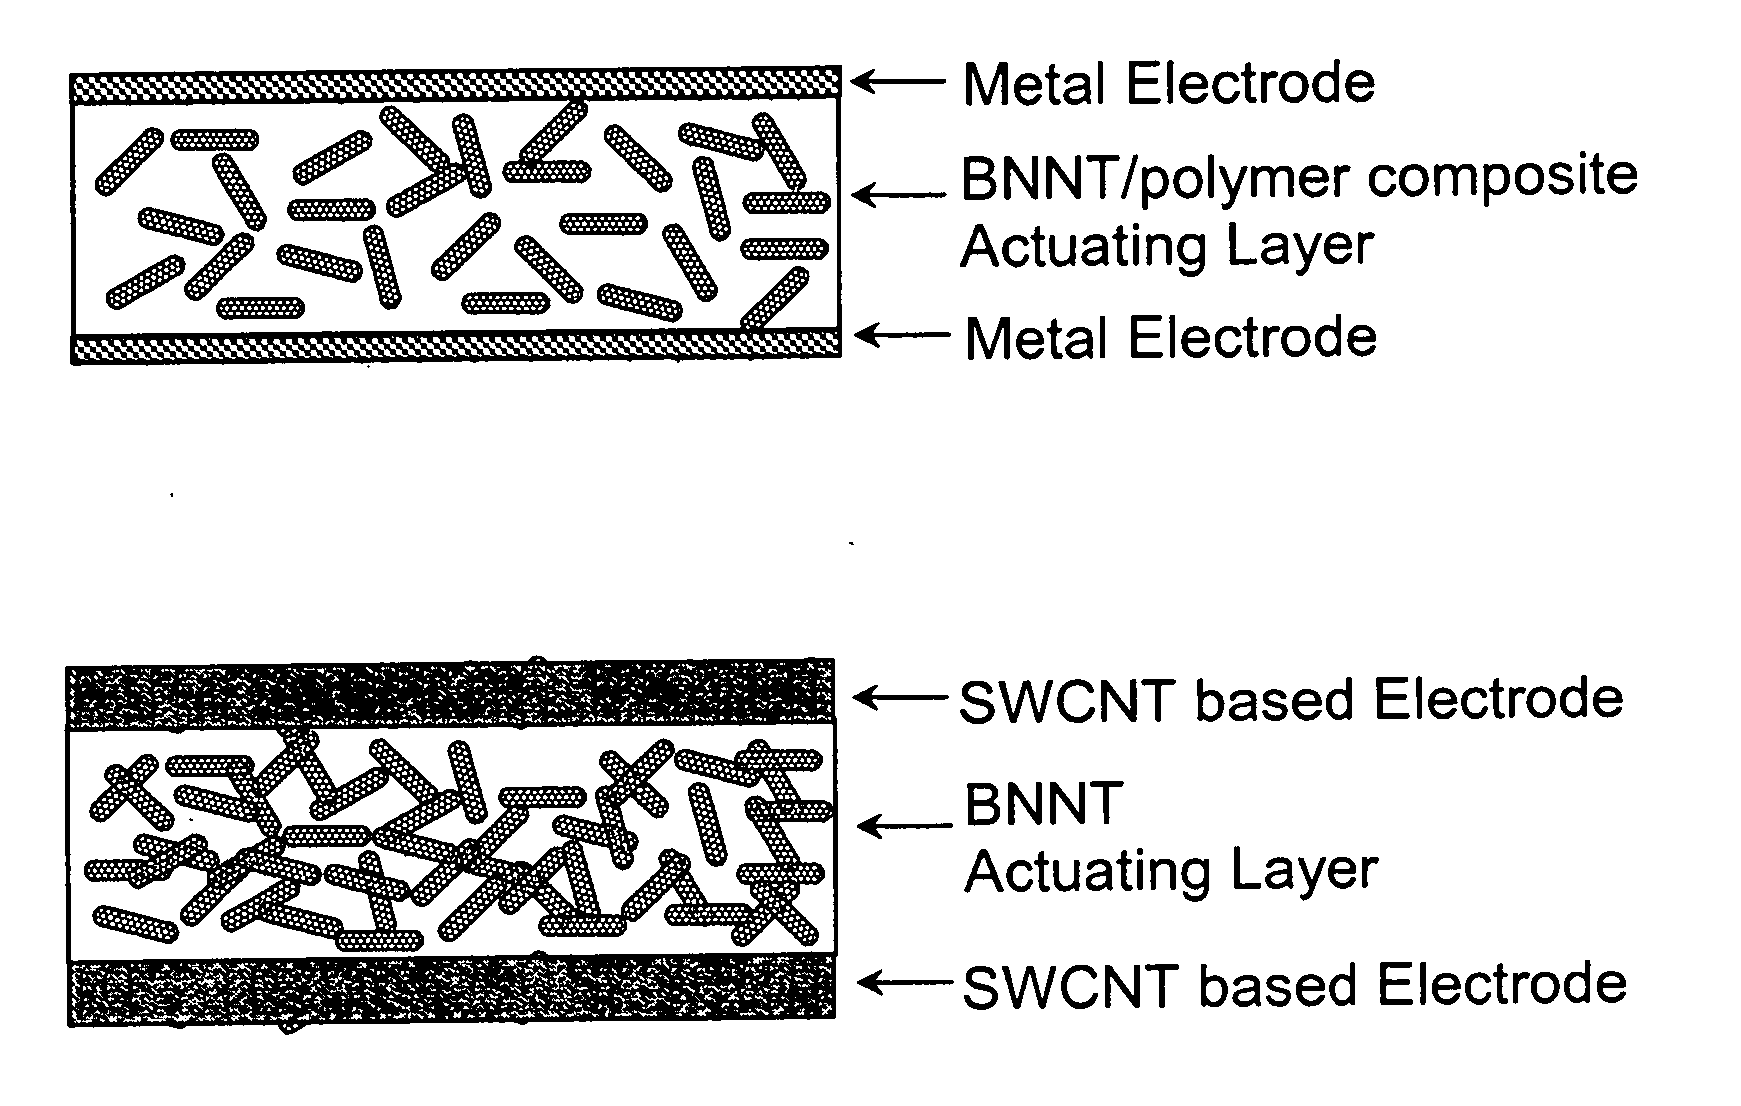 Energy conversion materials fabricated with boron nitride nanotubes (BNNTs) and BNNT polymer composites